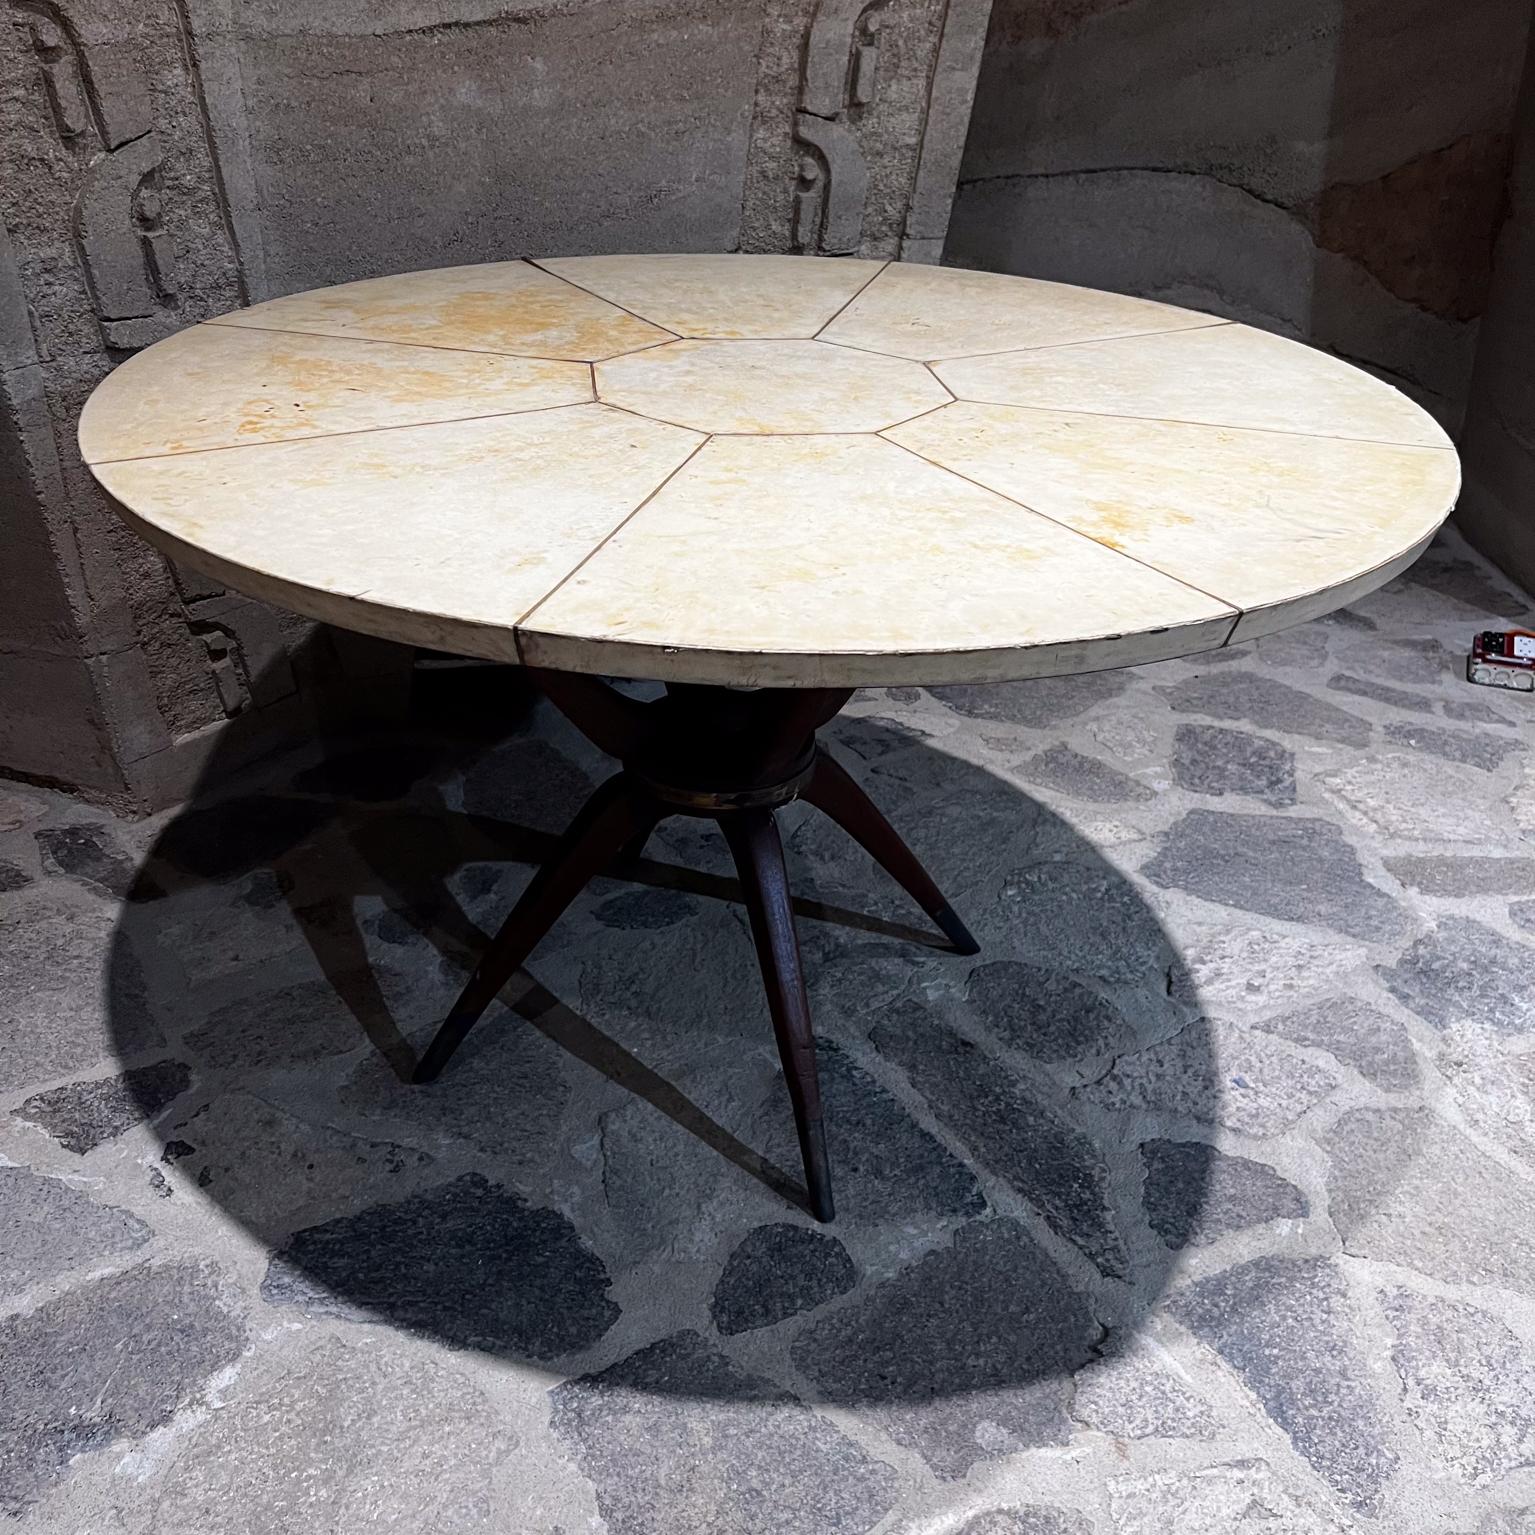 Mid-20th Century 1950s Sculptural Pani Dining Table Goatskin Mahogany & Brass Mexico City For Sale